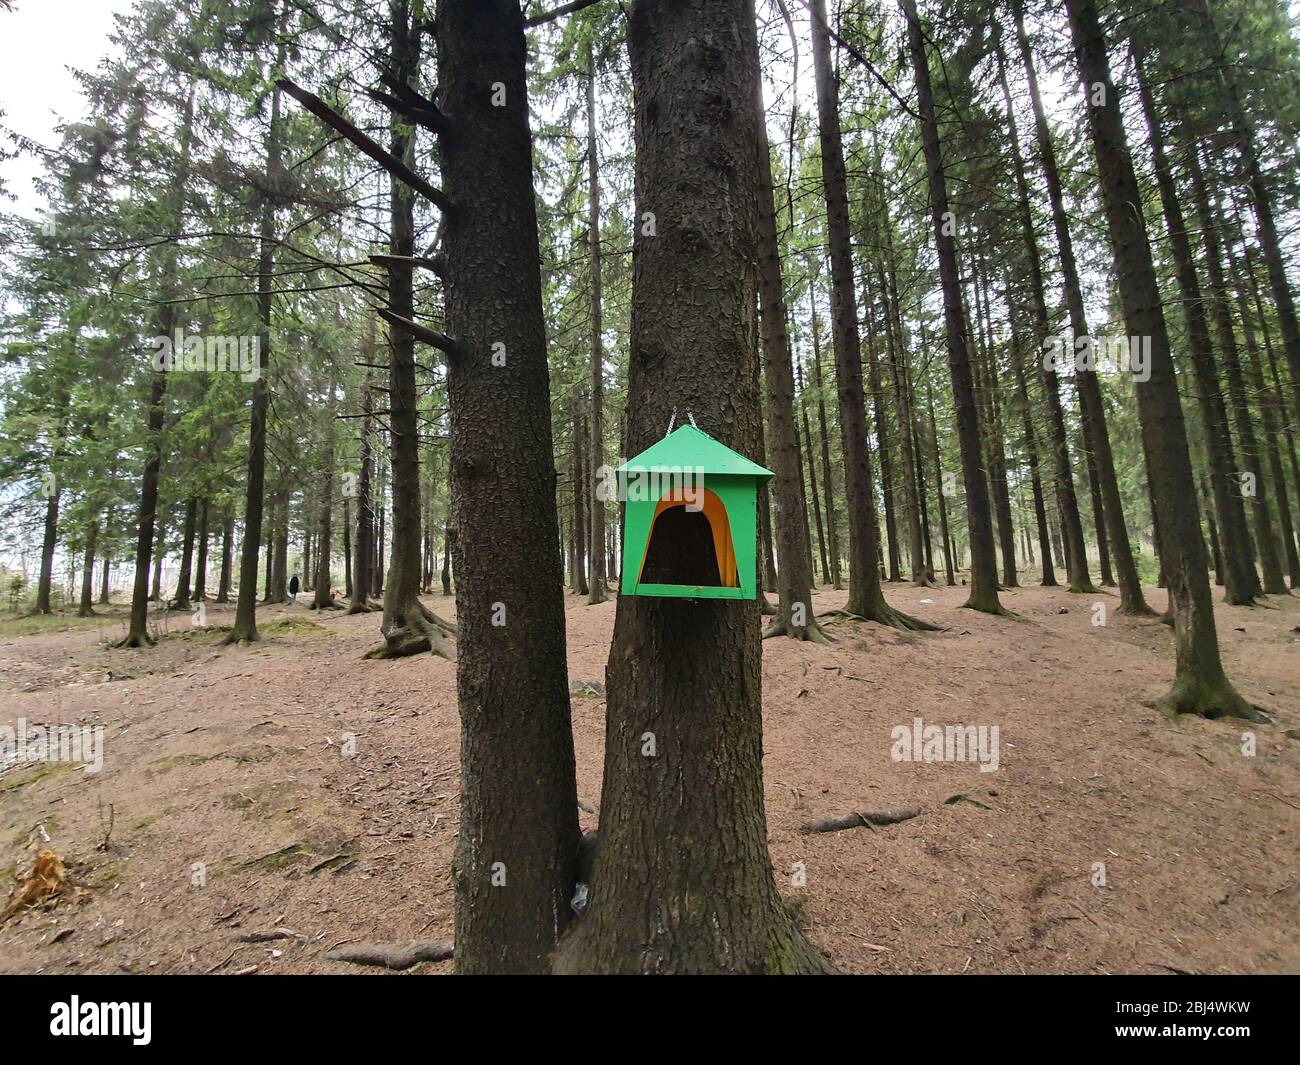 A green-colored bird feeder. The feeder is made of wood in the shape of a house and painted with green paint. Stock Photo